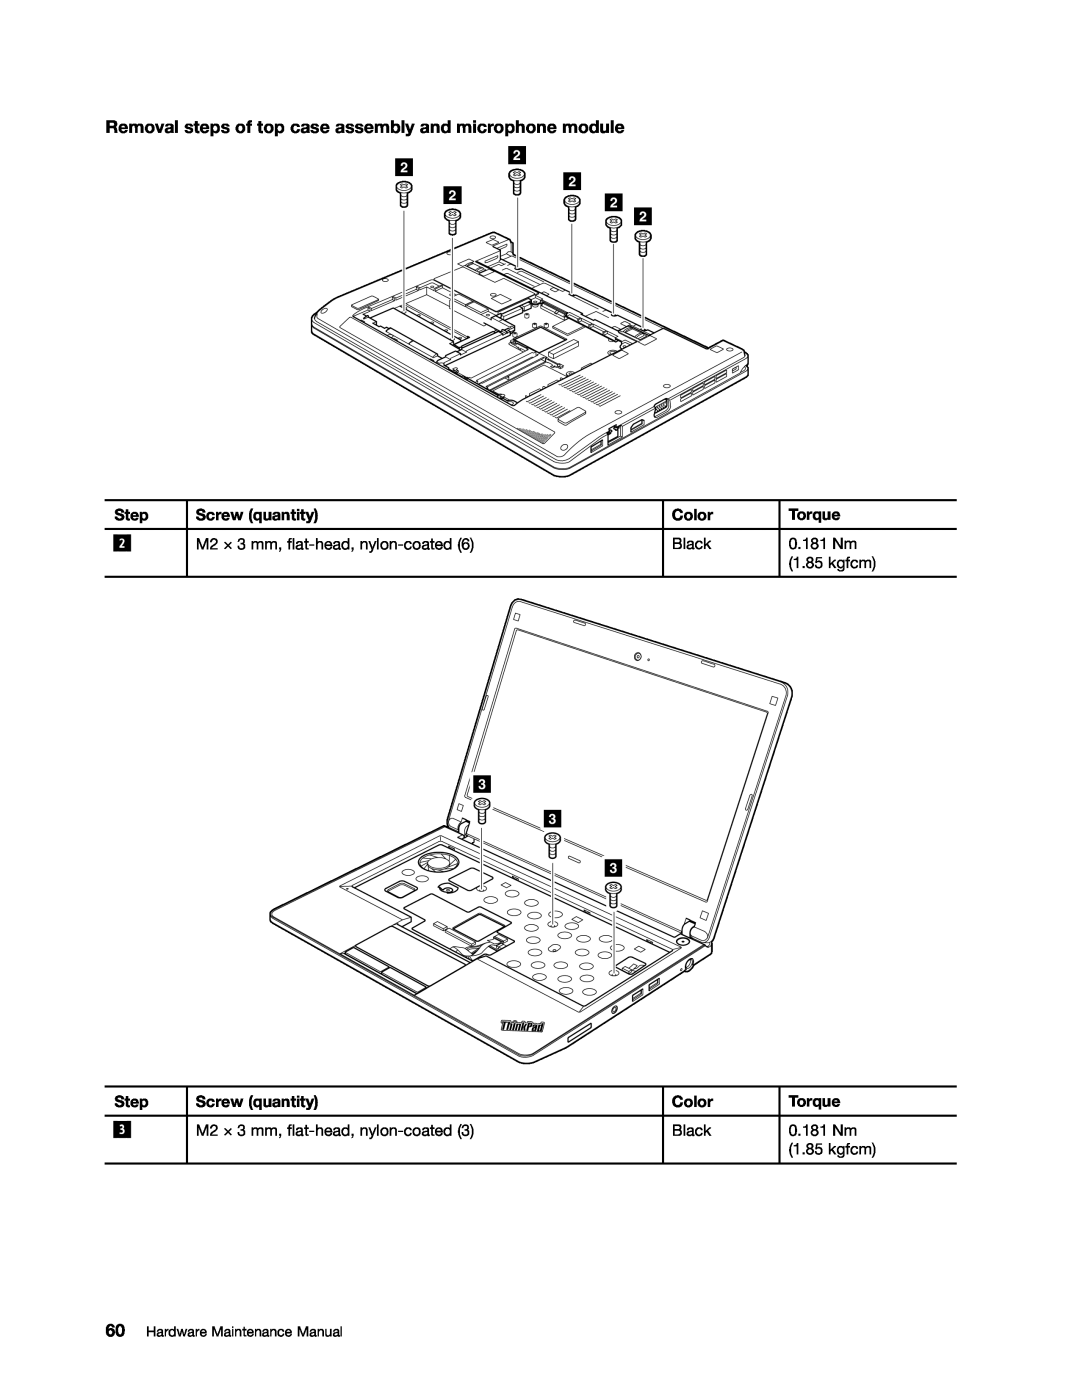 Lenovo E31, E30, EDGE 13 manual Removal steps of top case assembly and microphone module, Hardware Maintenance Manual 